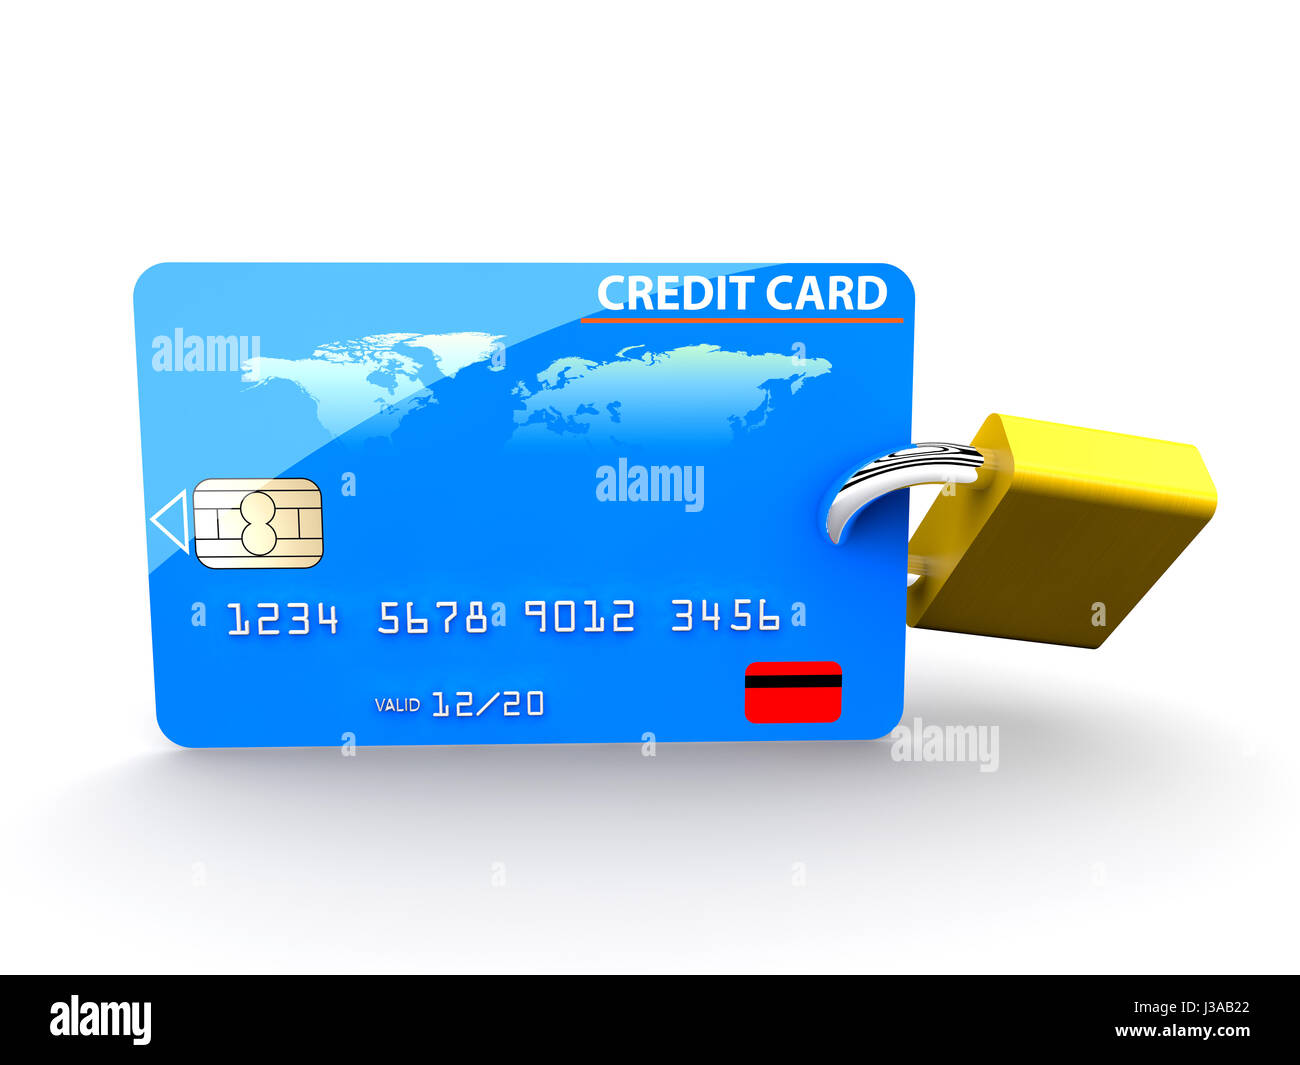 A padlock in a credit card: security concept Stock Photo